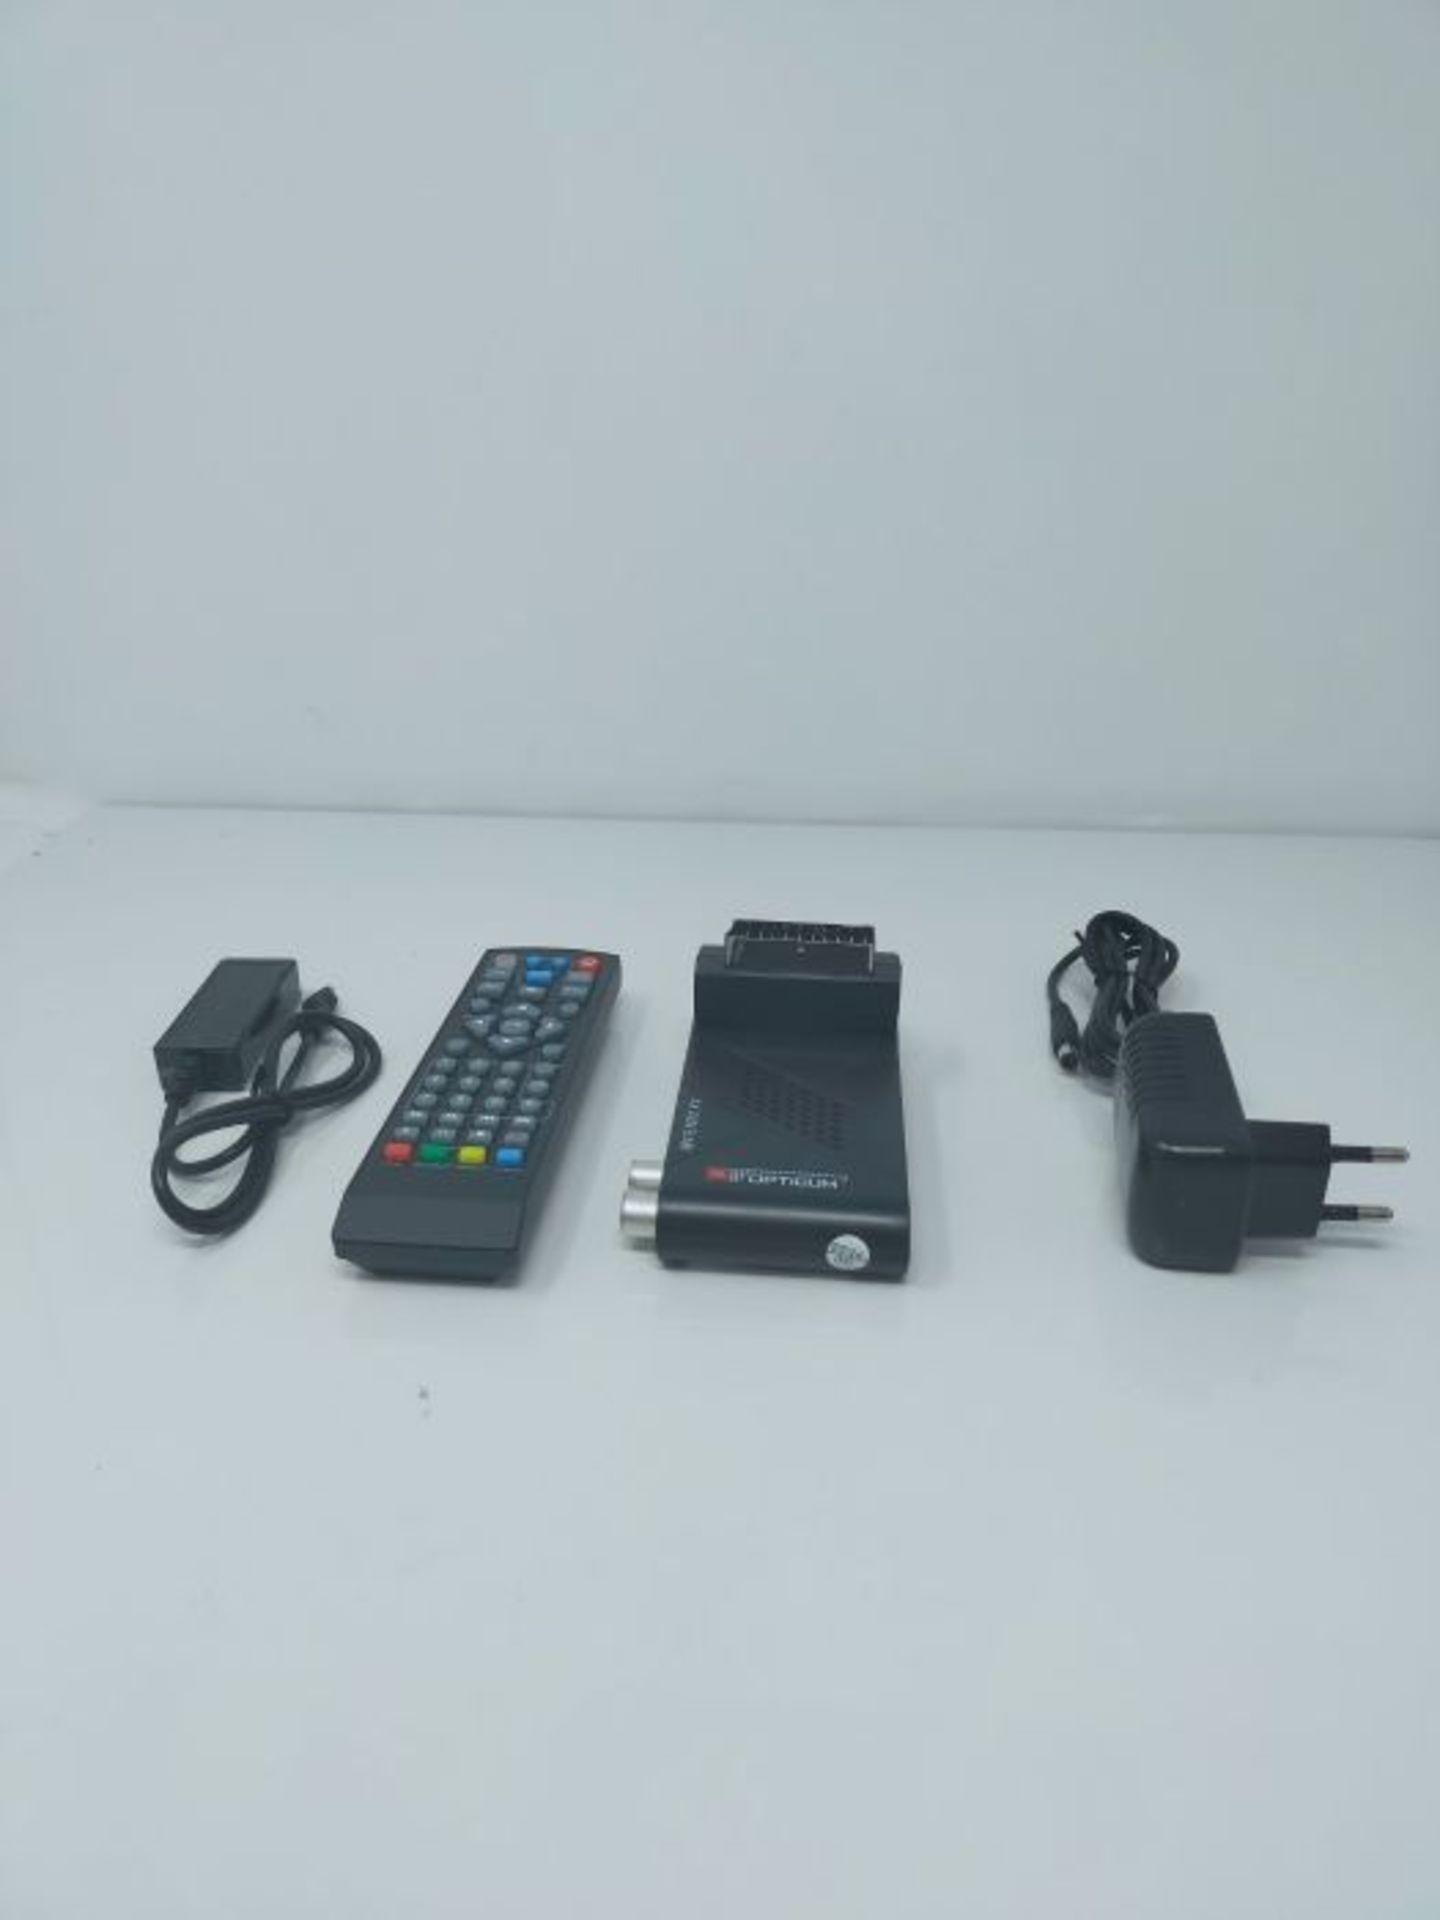 RED OPTICUM AX Lion 5 Air DVB-T2 H.265 Receiver with Recording Function - External IR - Image 2 of 2